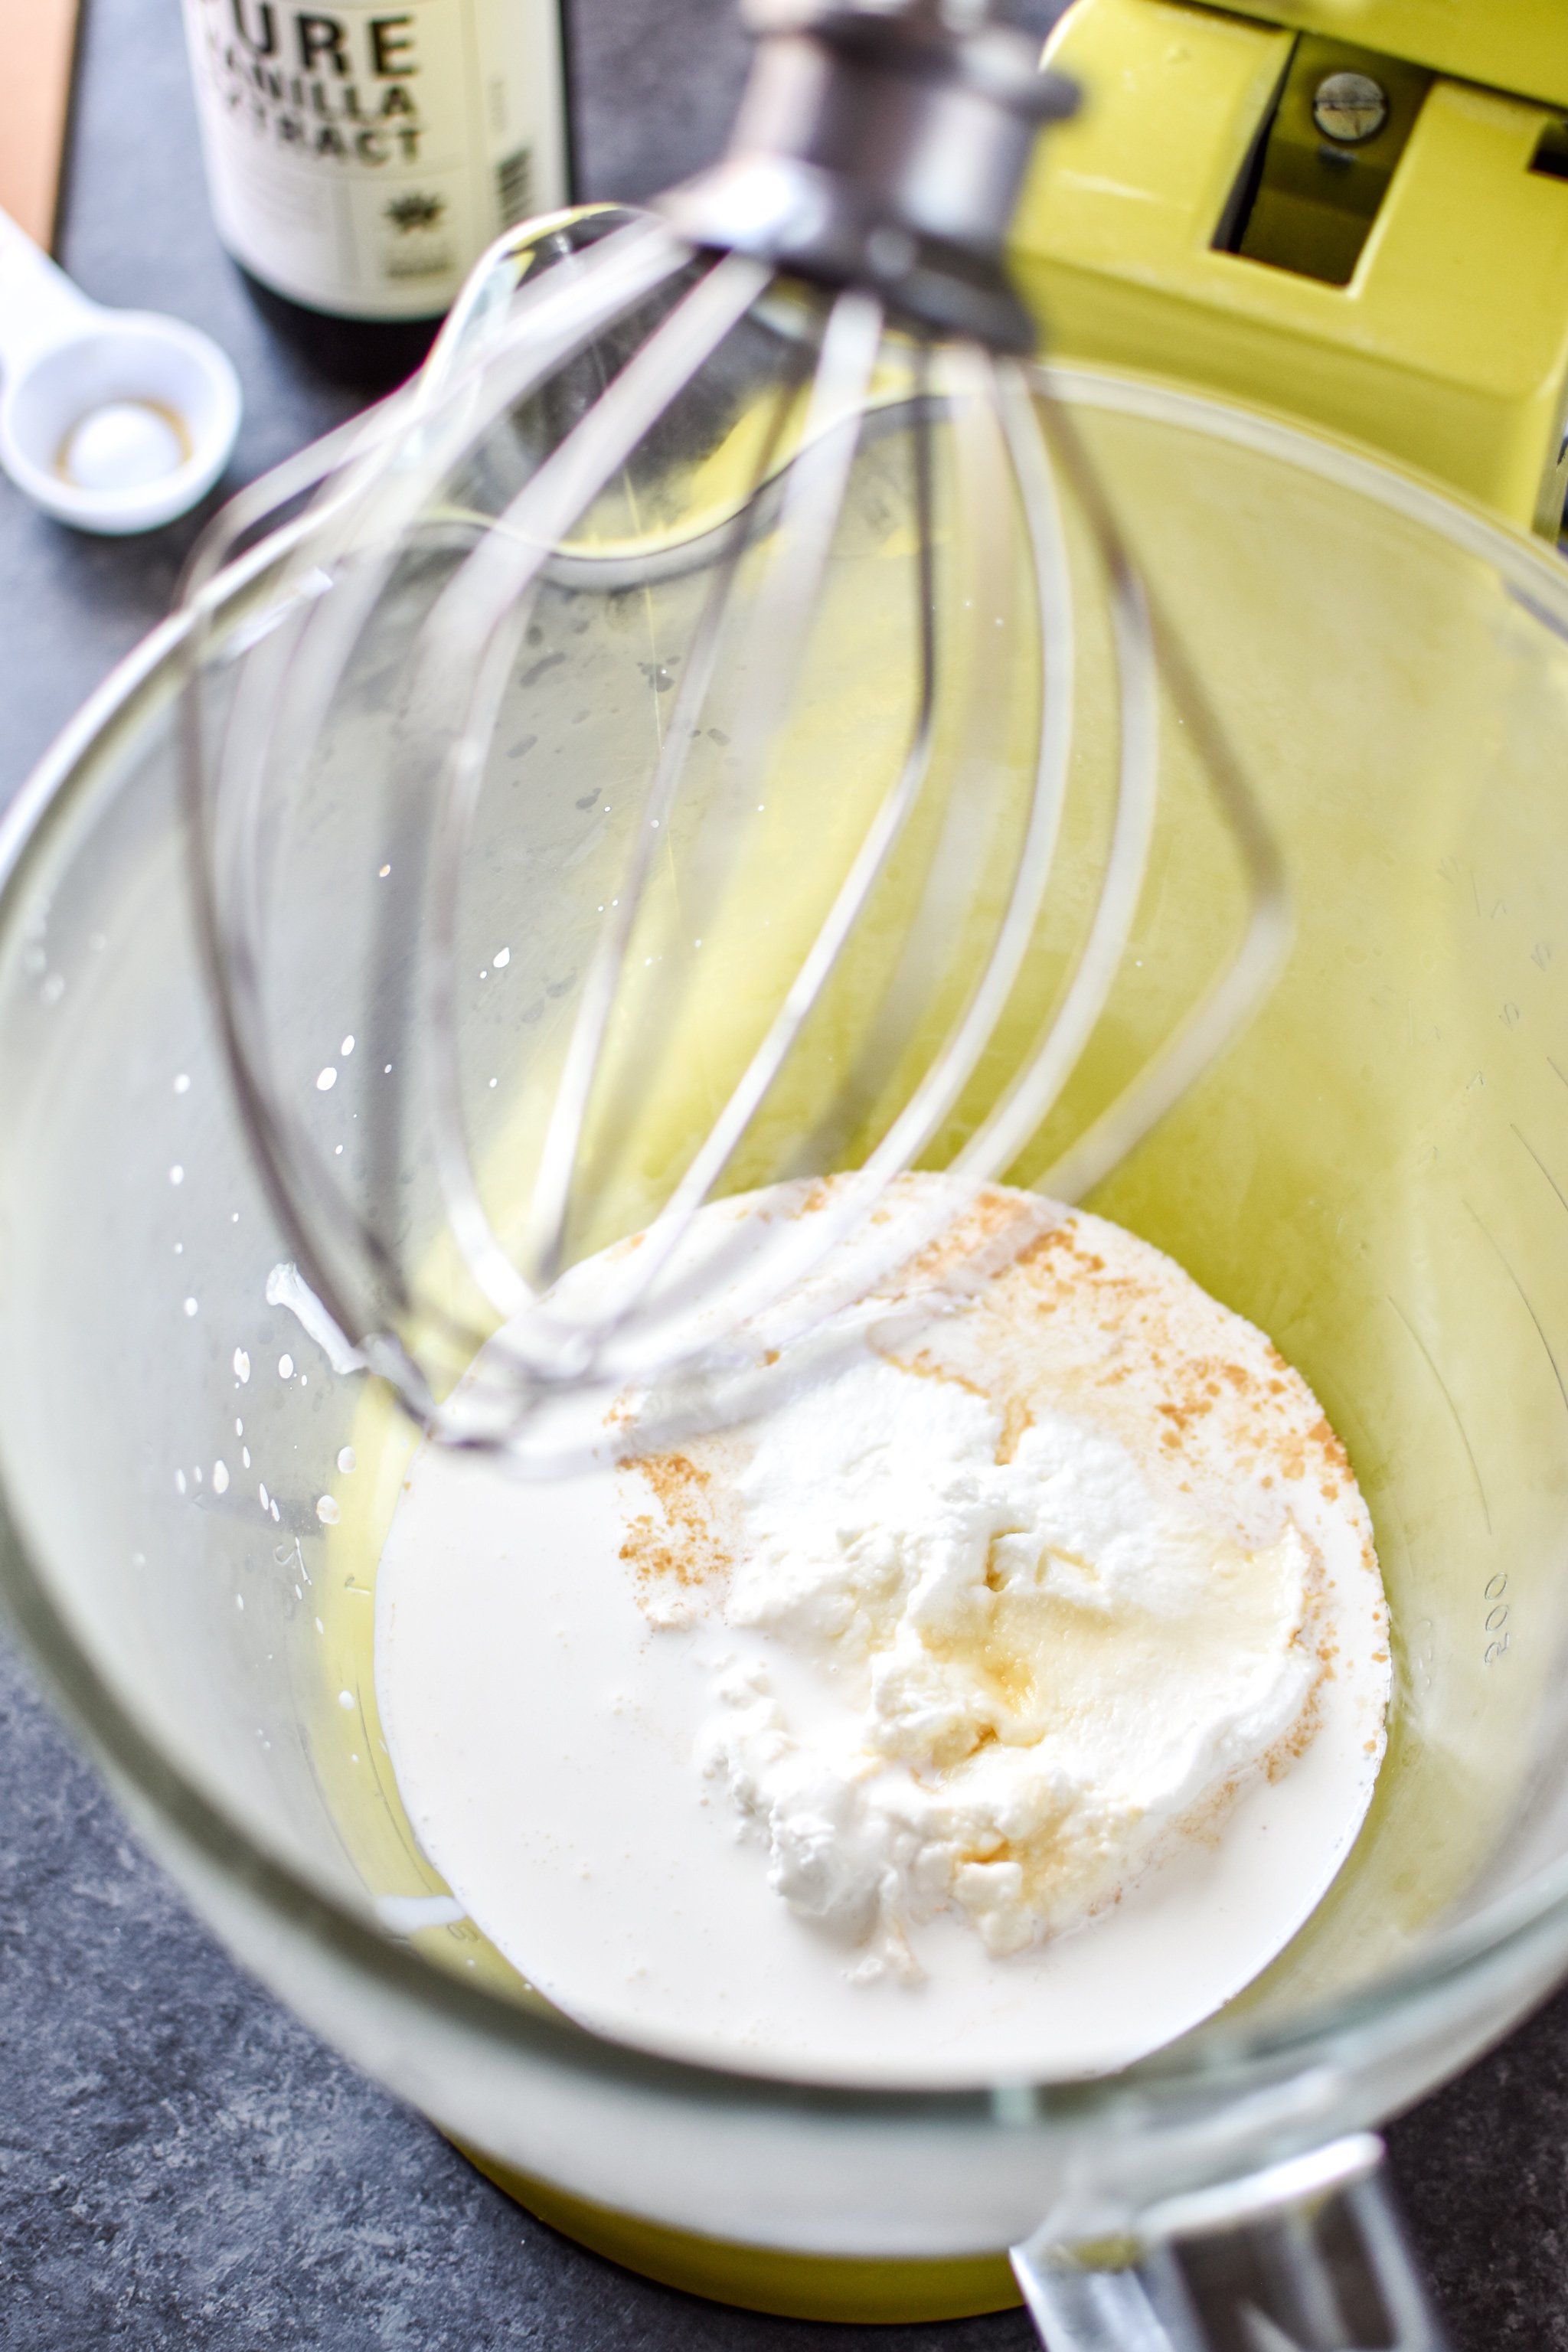 How to Make Whipped Greek Yogurt (and Why You’d Want To)